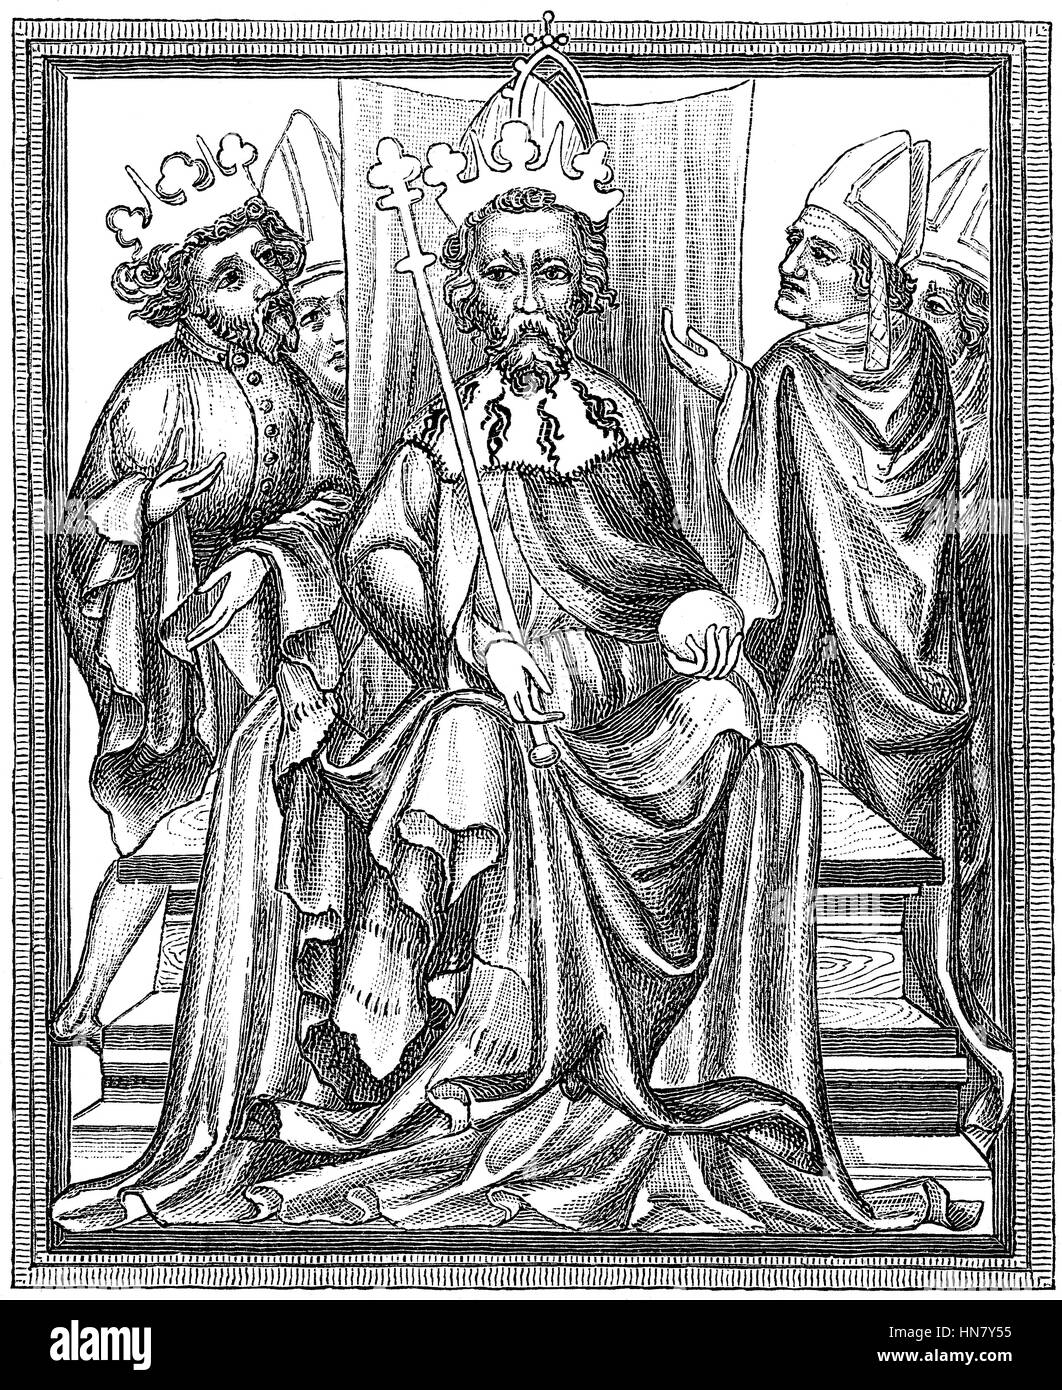 Golden Bull, Charles IV, born Wenceslaus, 1316-1378, King of Bohemia, Holy Roman Emperor, with his son Wenzel, der Faule Stock Photo